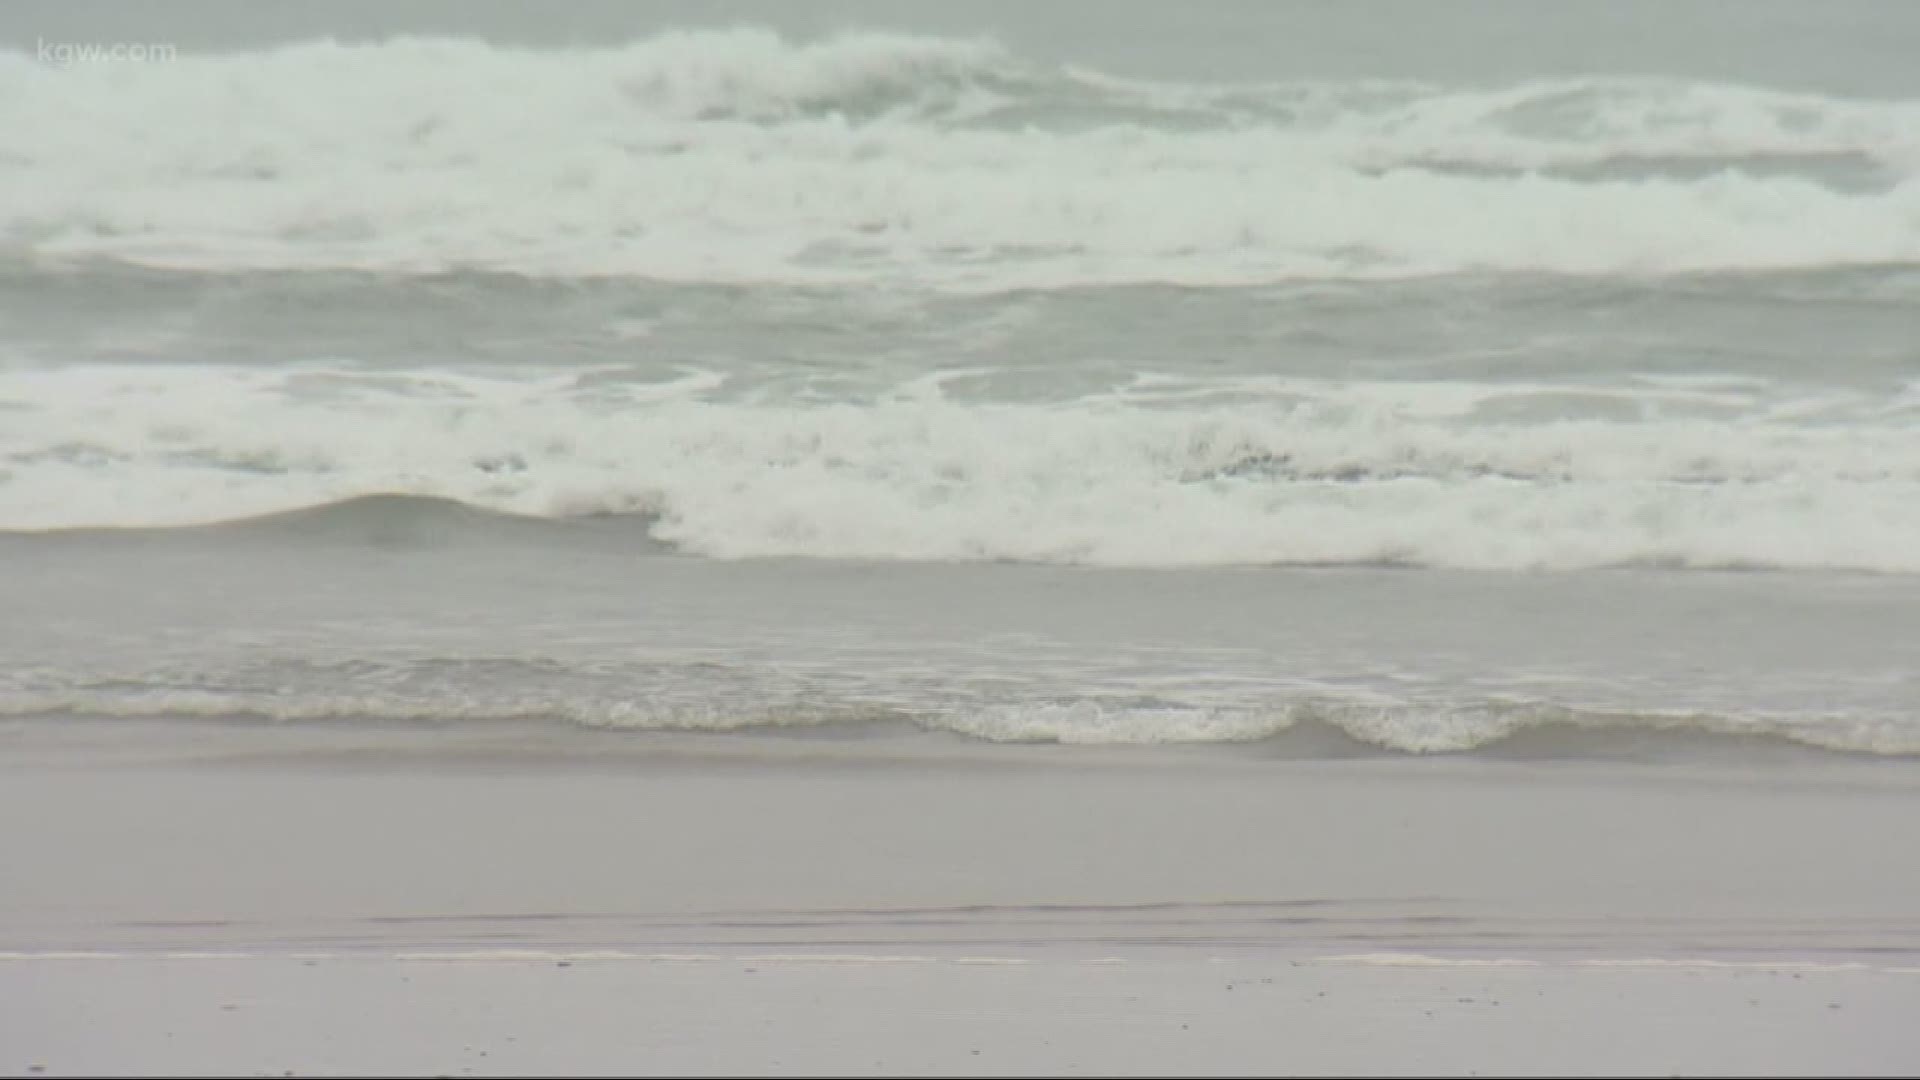 Officials warn of sneaker waves Tuesday on Oregon beaches